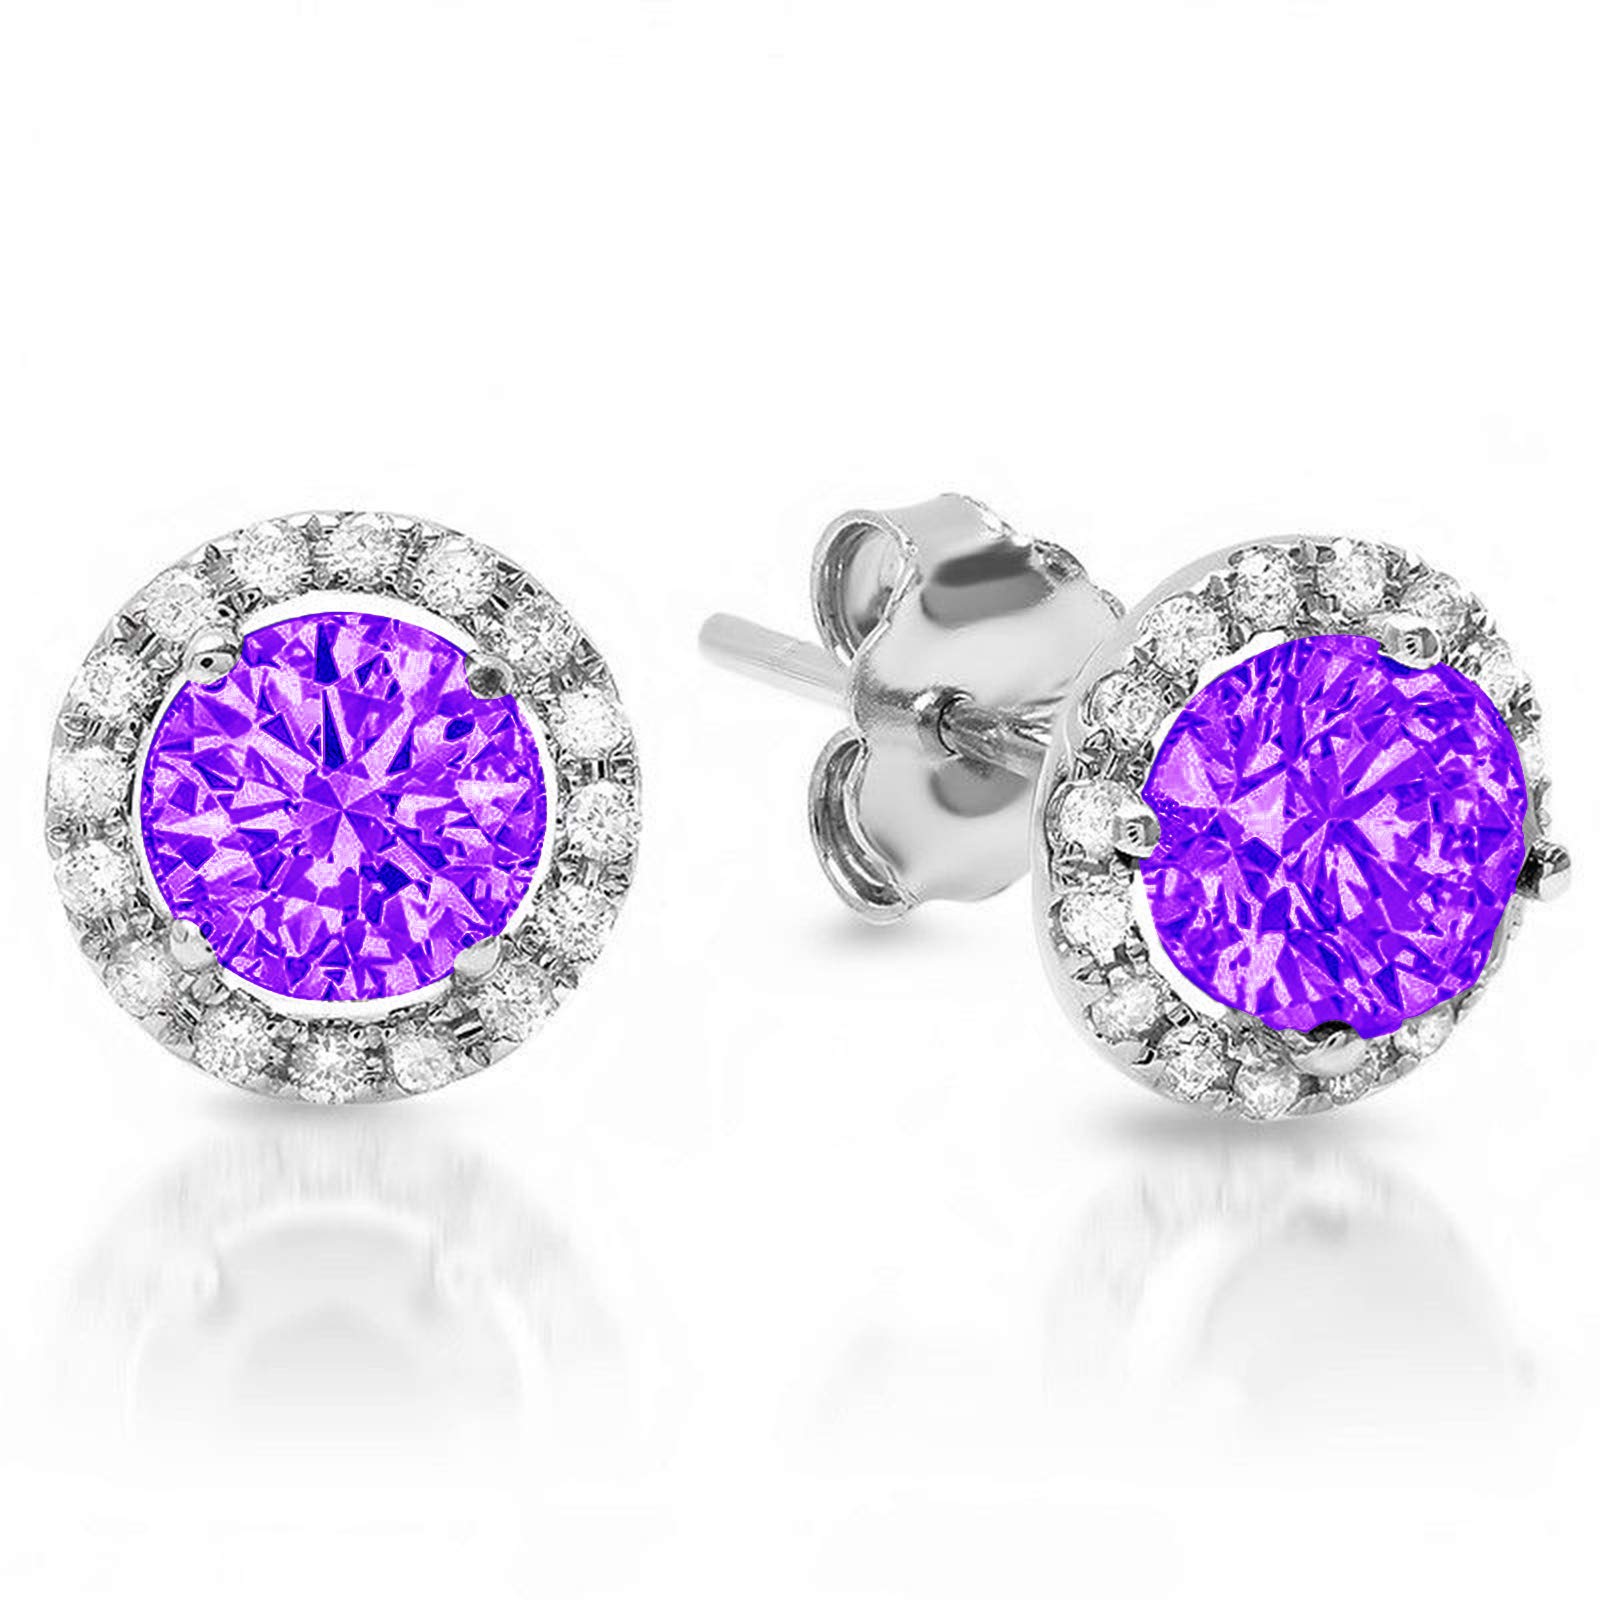 1.60 ct Round Cut ideal VVS1 Conflict Free Gemstone Halo Solitaire Natural Purple Amethyst Designer Solitaire Stud Screw Back Earrings Solid 14k White Gold